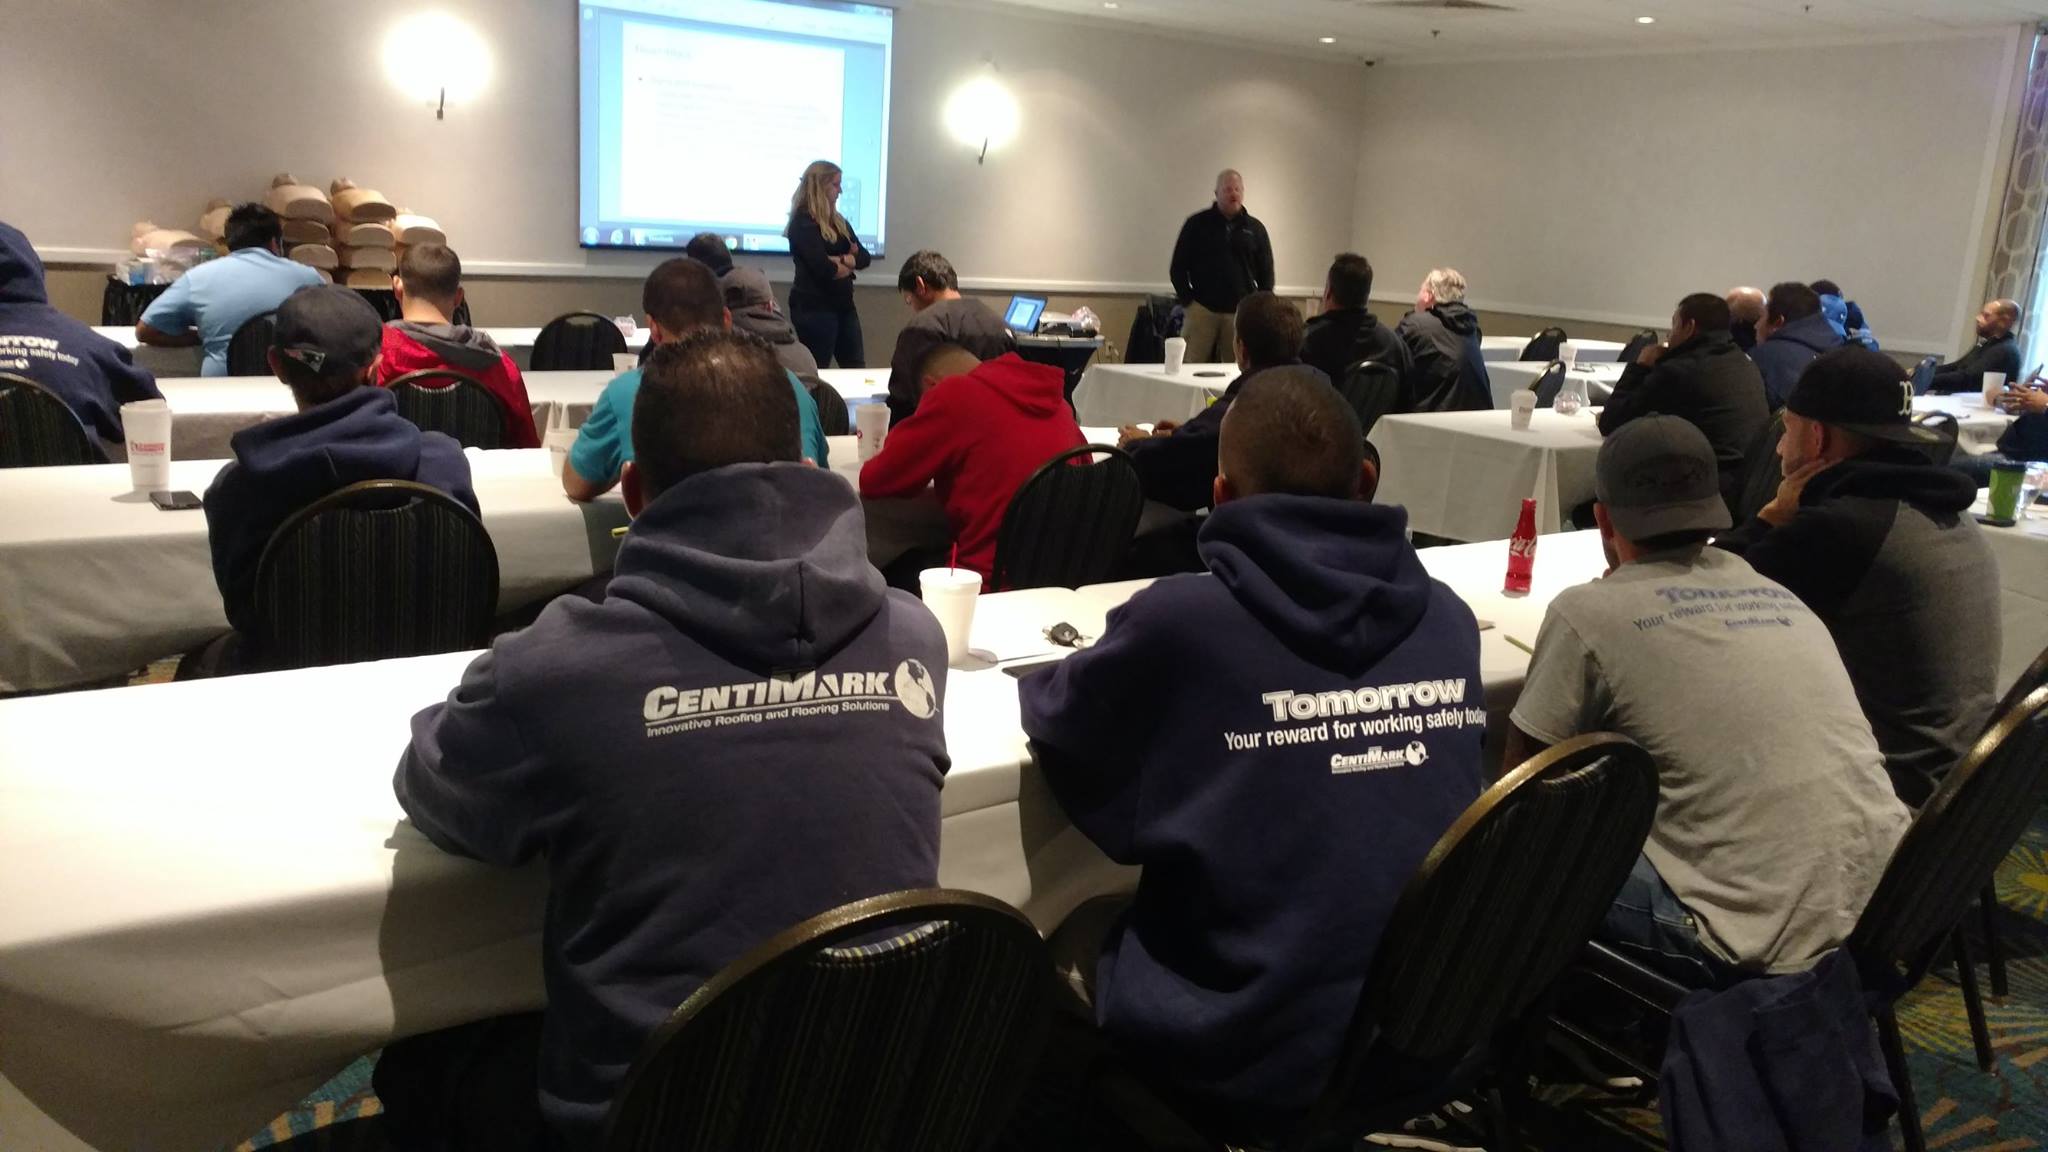 CentiMark staff speak to frontline workers in a training session